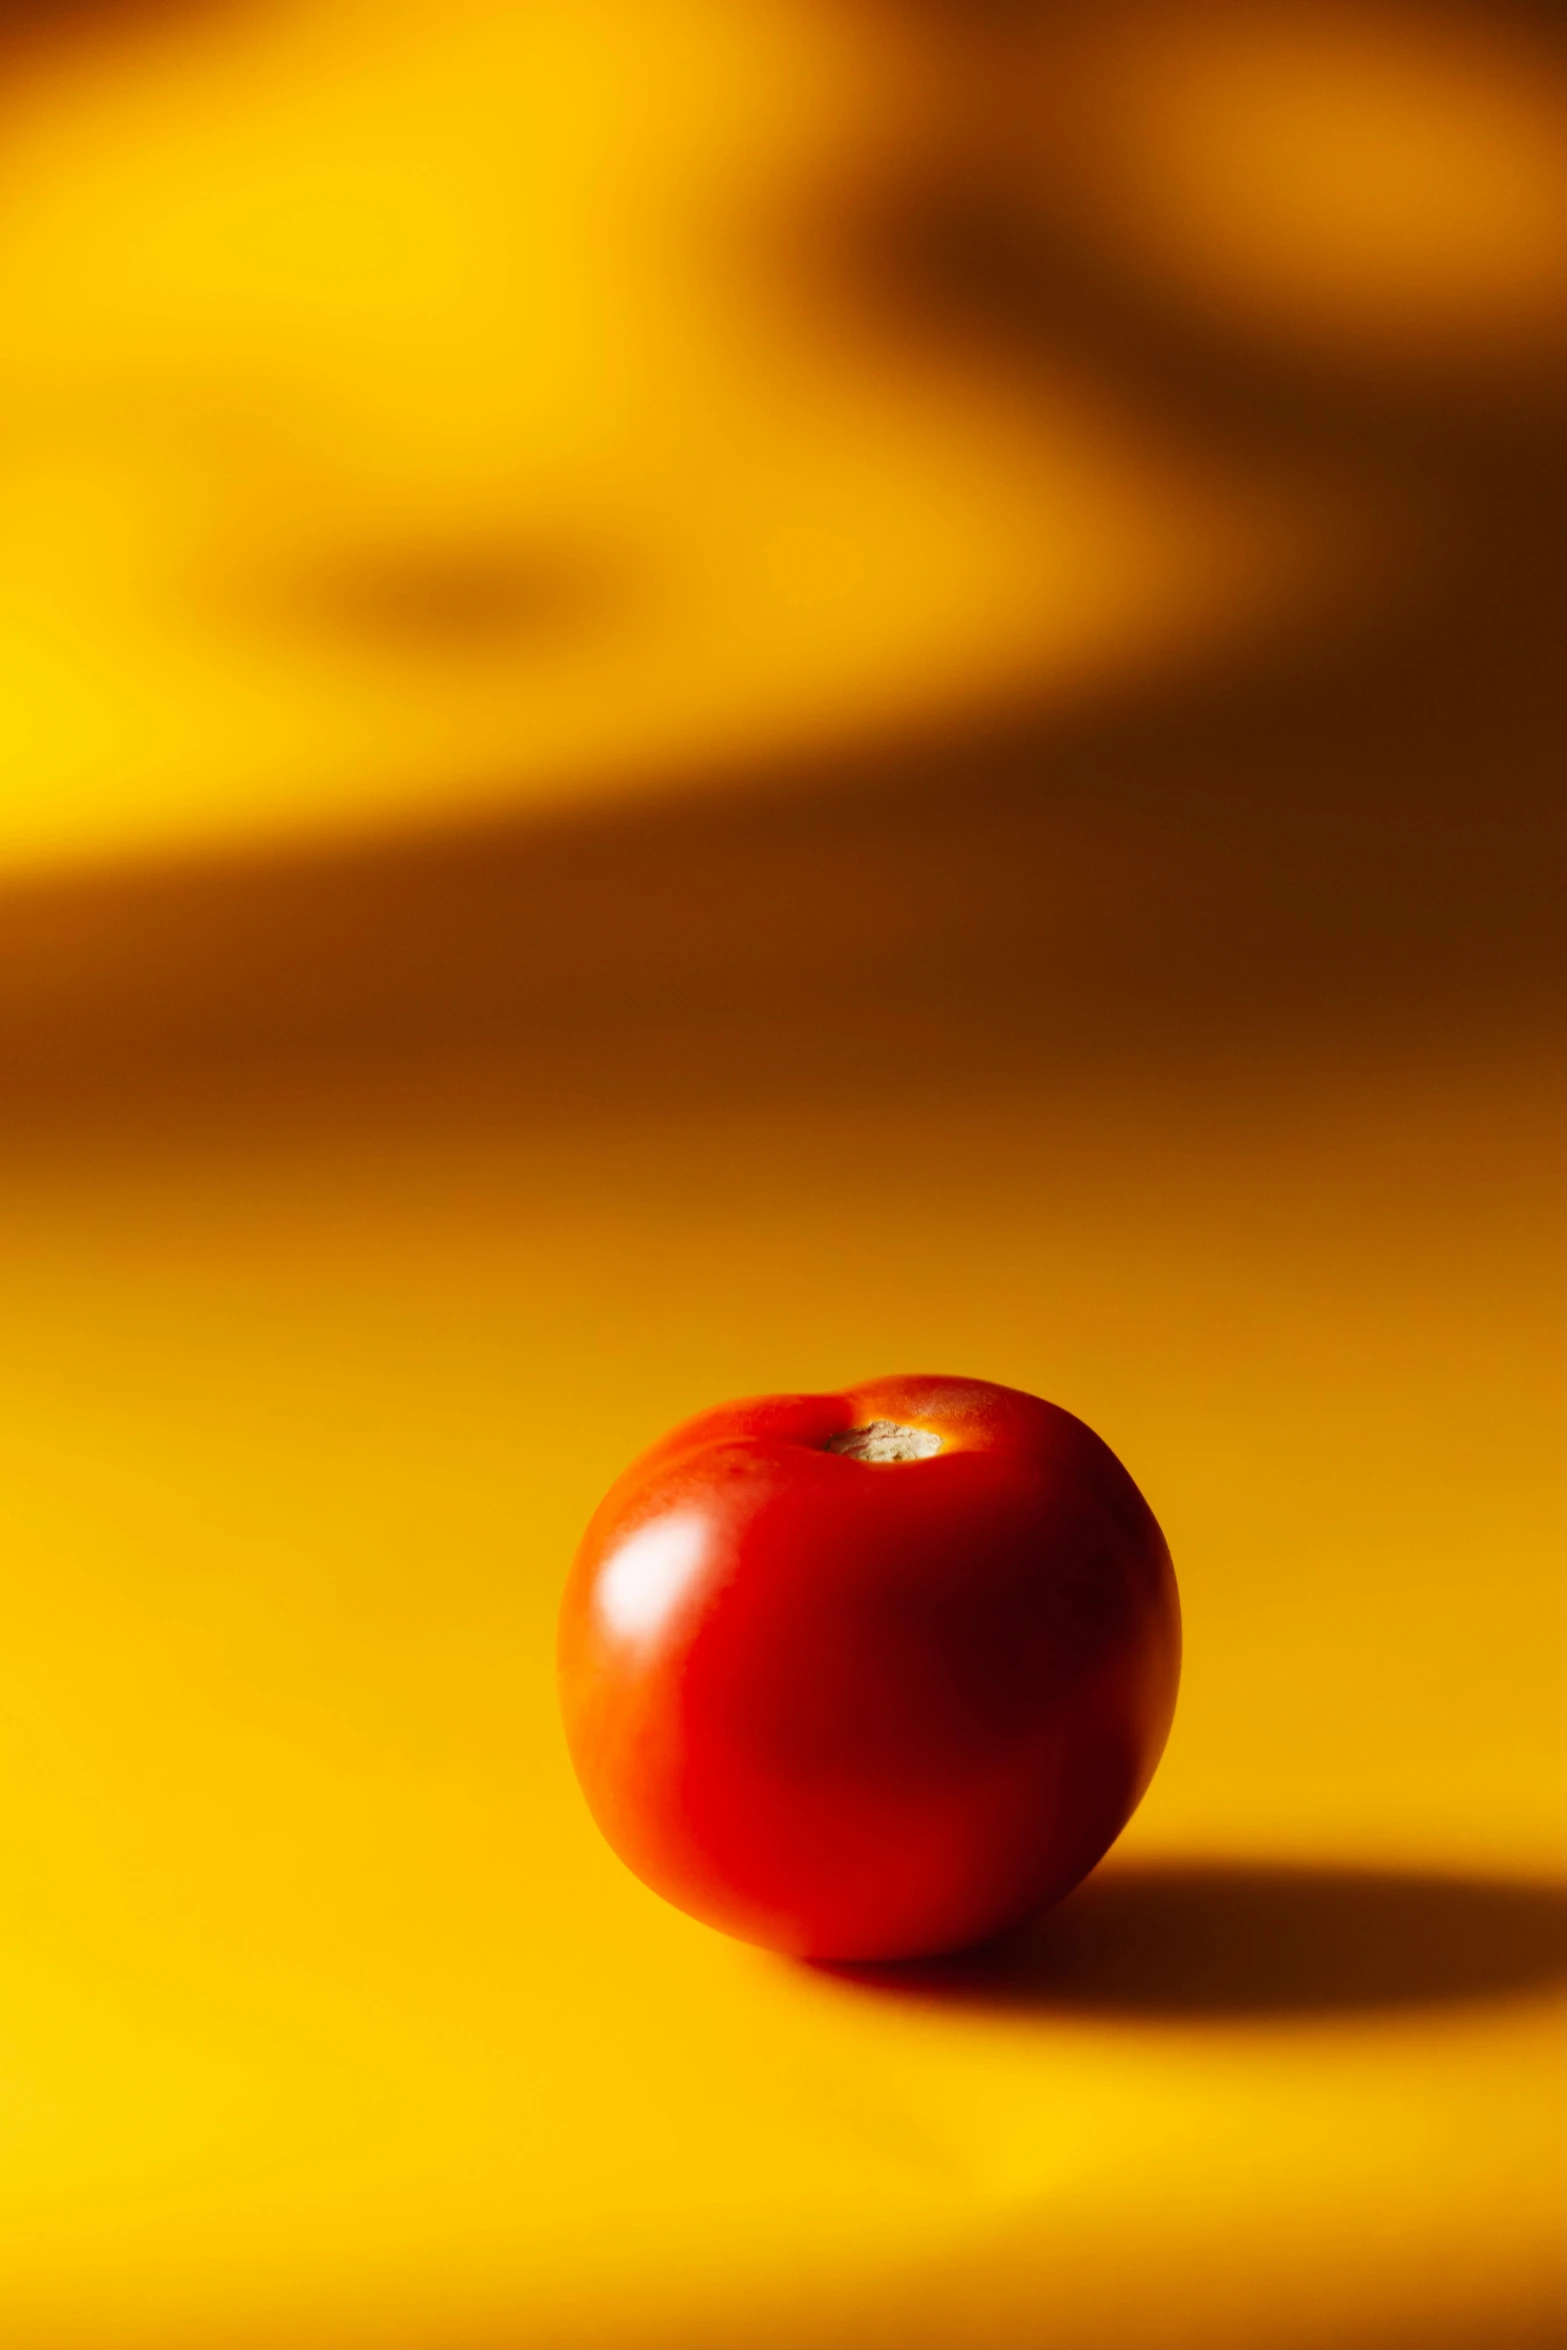 a red apple sitting on top of a yellow surface, ap news photo, tomato, tiltshift, still life photo of a backdrop